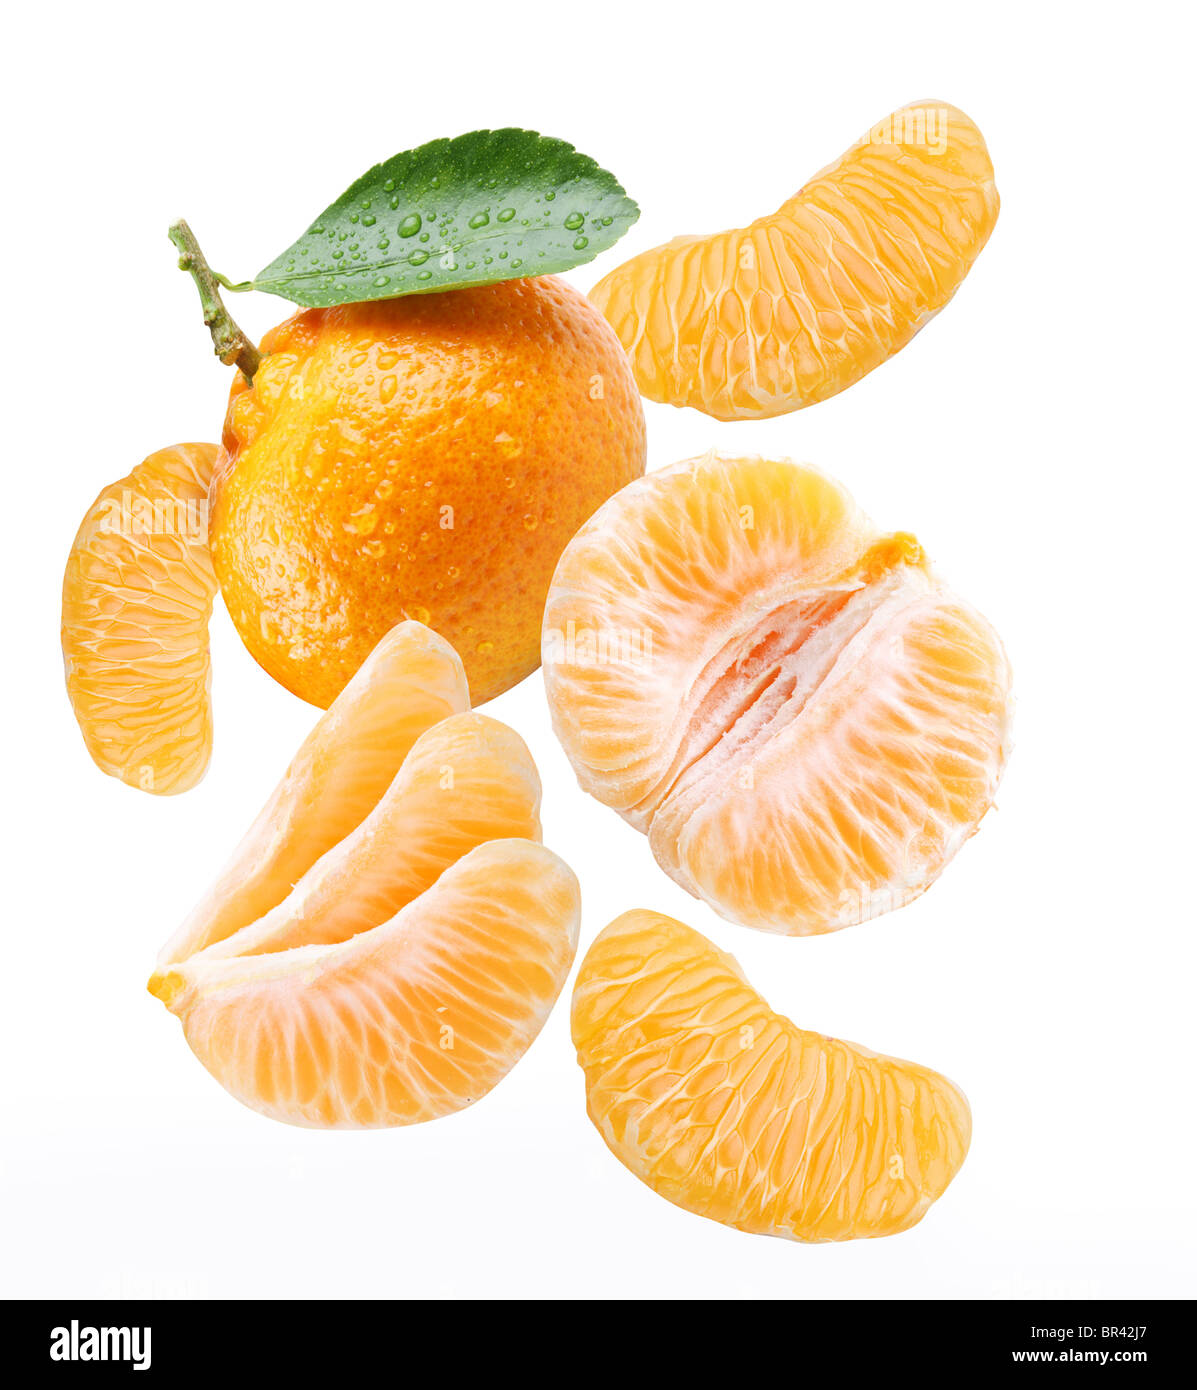 Falling tangerine and tangerine slices. Isolated on a white background. Stock Photo